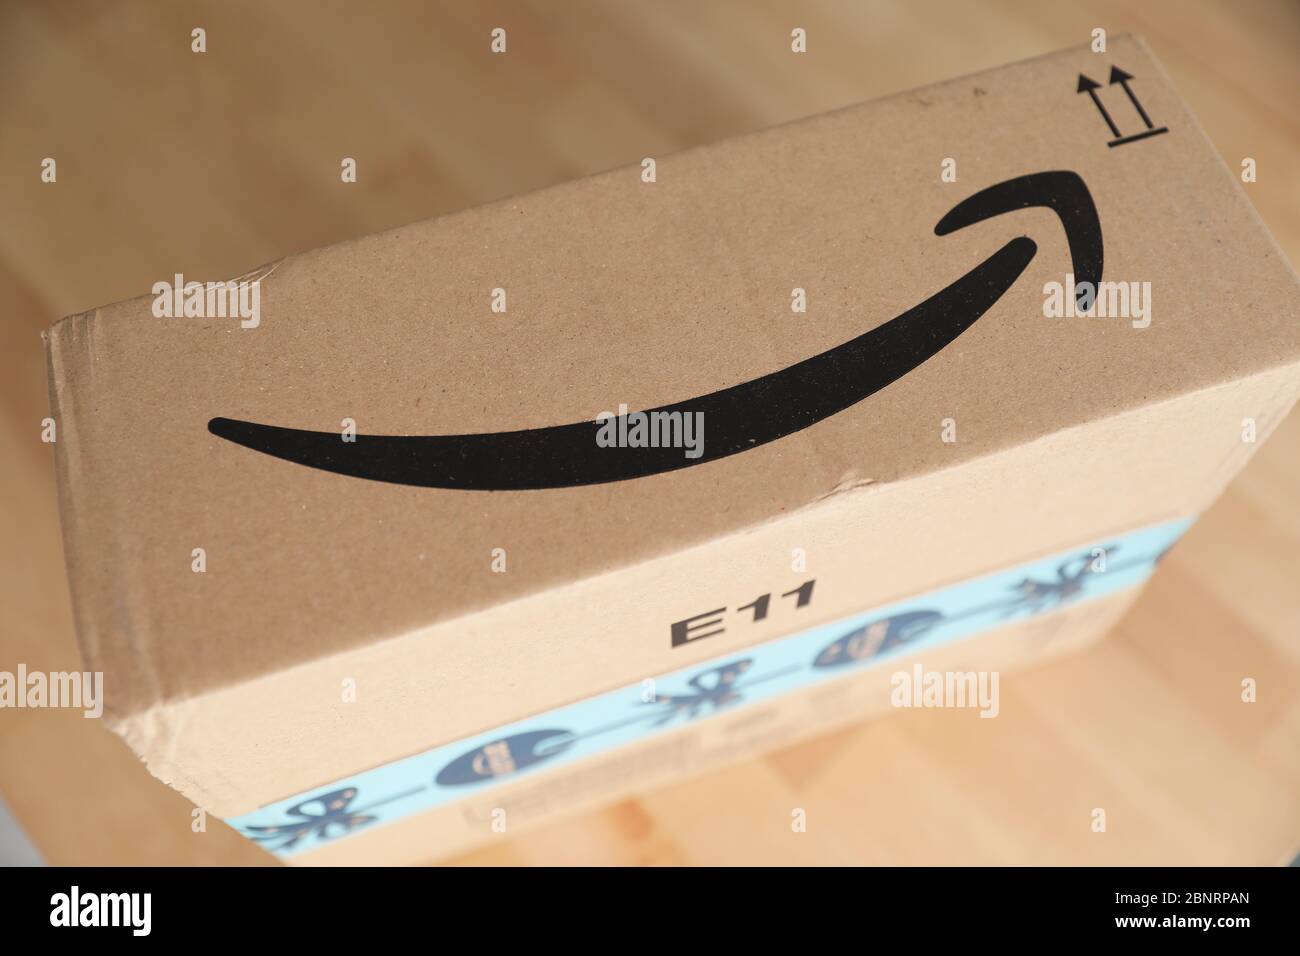 Roquebrune-Cap-Martin, France, November 3, 2018: Arrow Or Smile Logo Of Amazon On The Cardboard Box Of A Package Delivery From Amazon Prime, Close Up Stock Photo